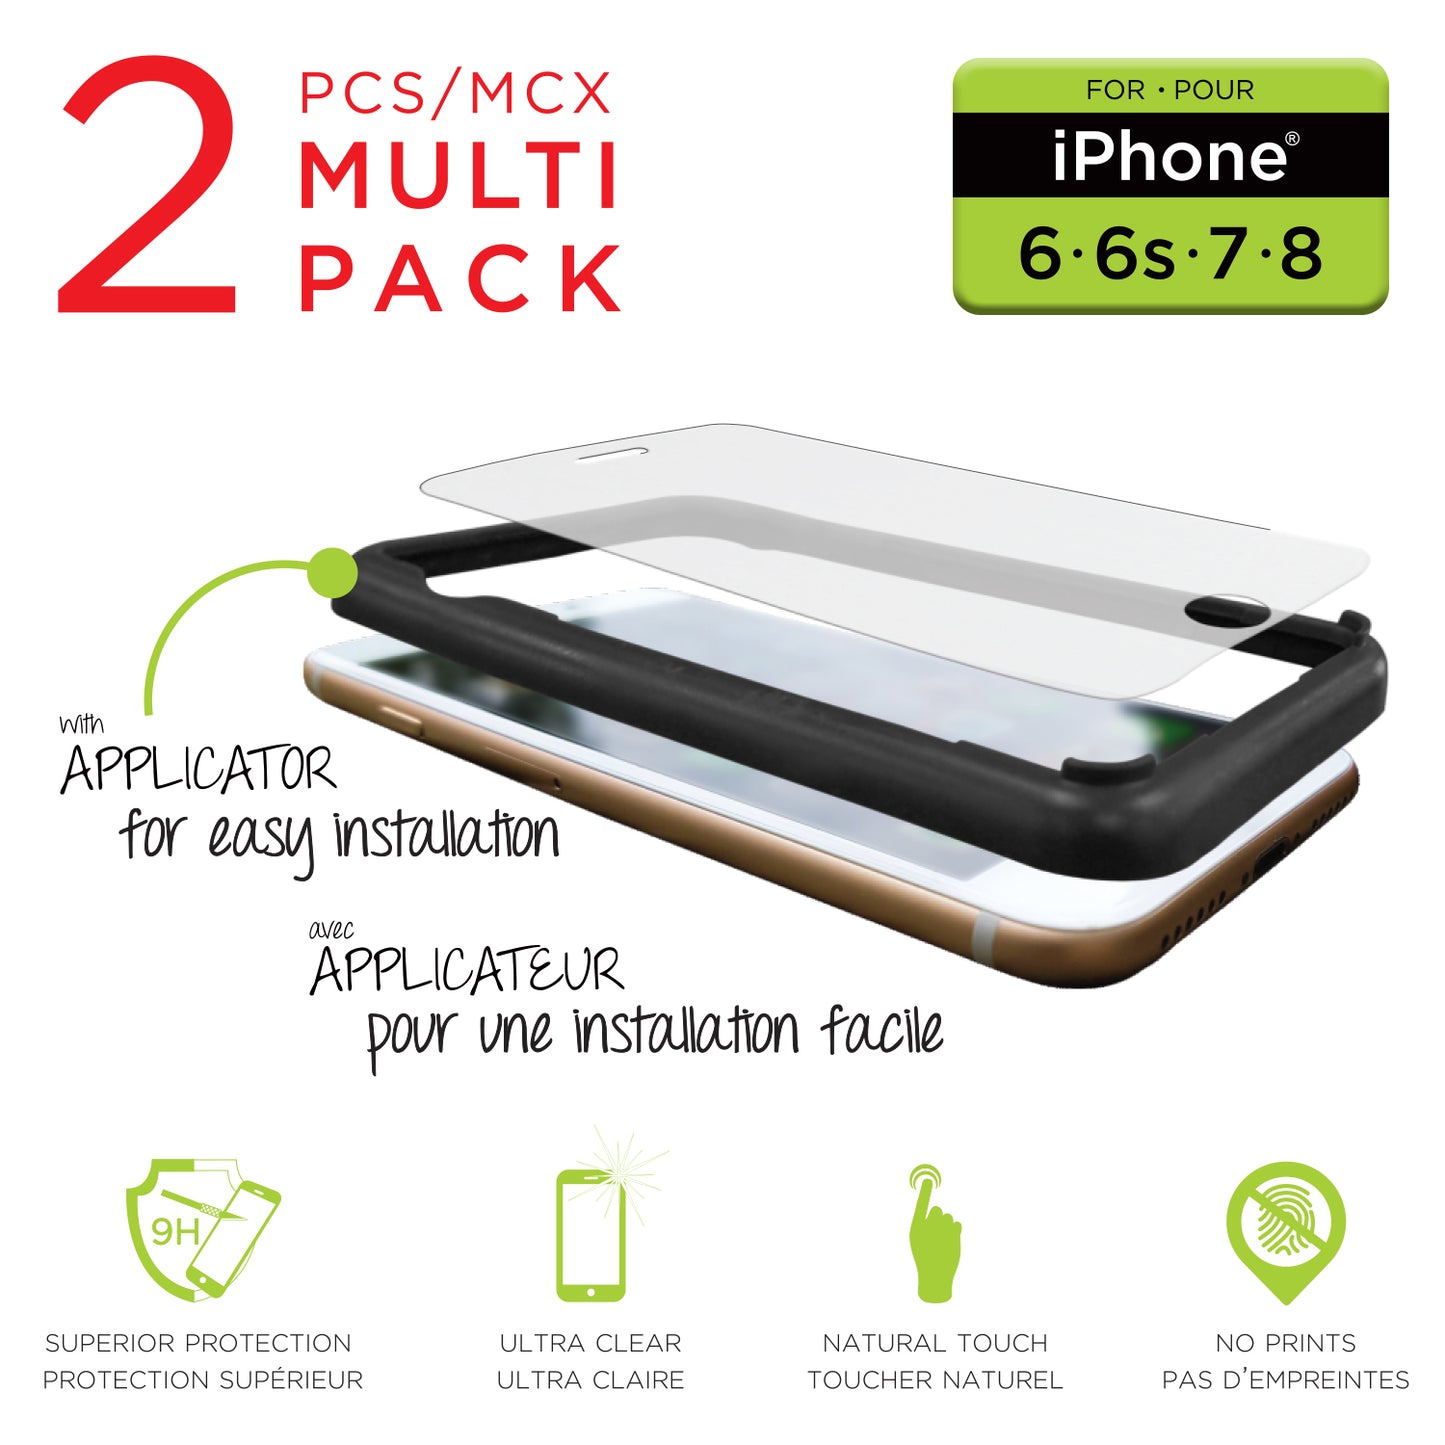 Screen Protector - Tempered Glass for Iphone